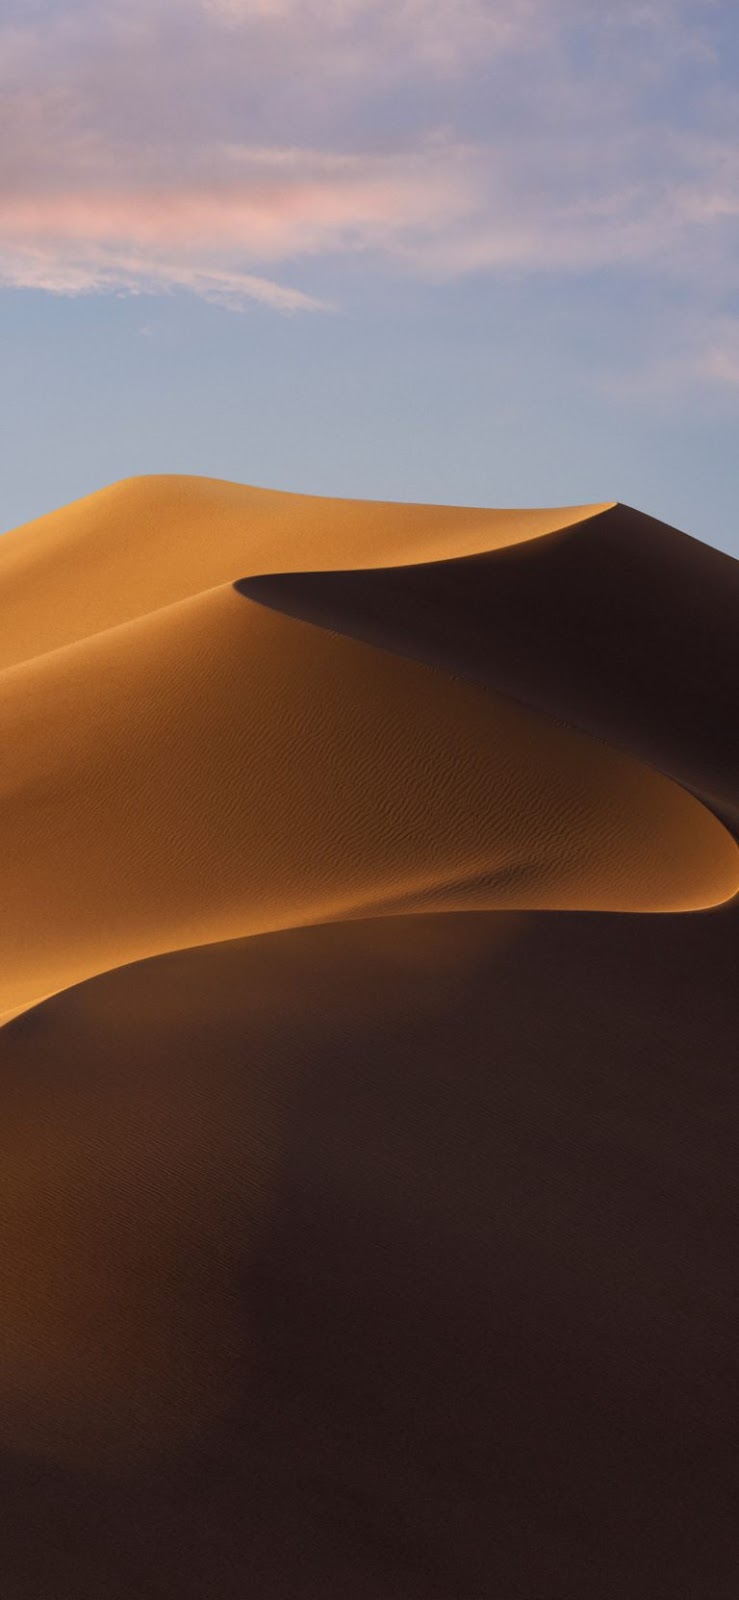 Download The Macos 10 14 Mojave Light Dark Wallpaper For Your Ios Devices